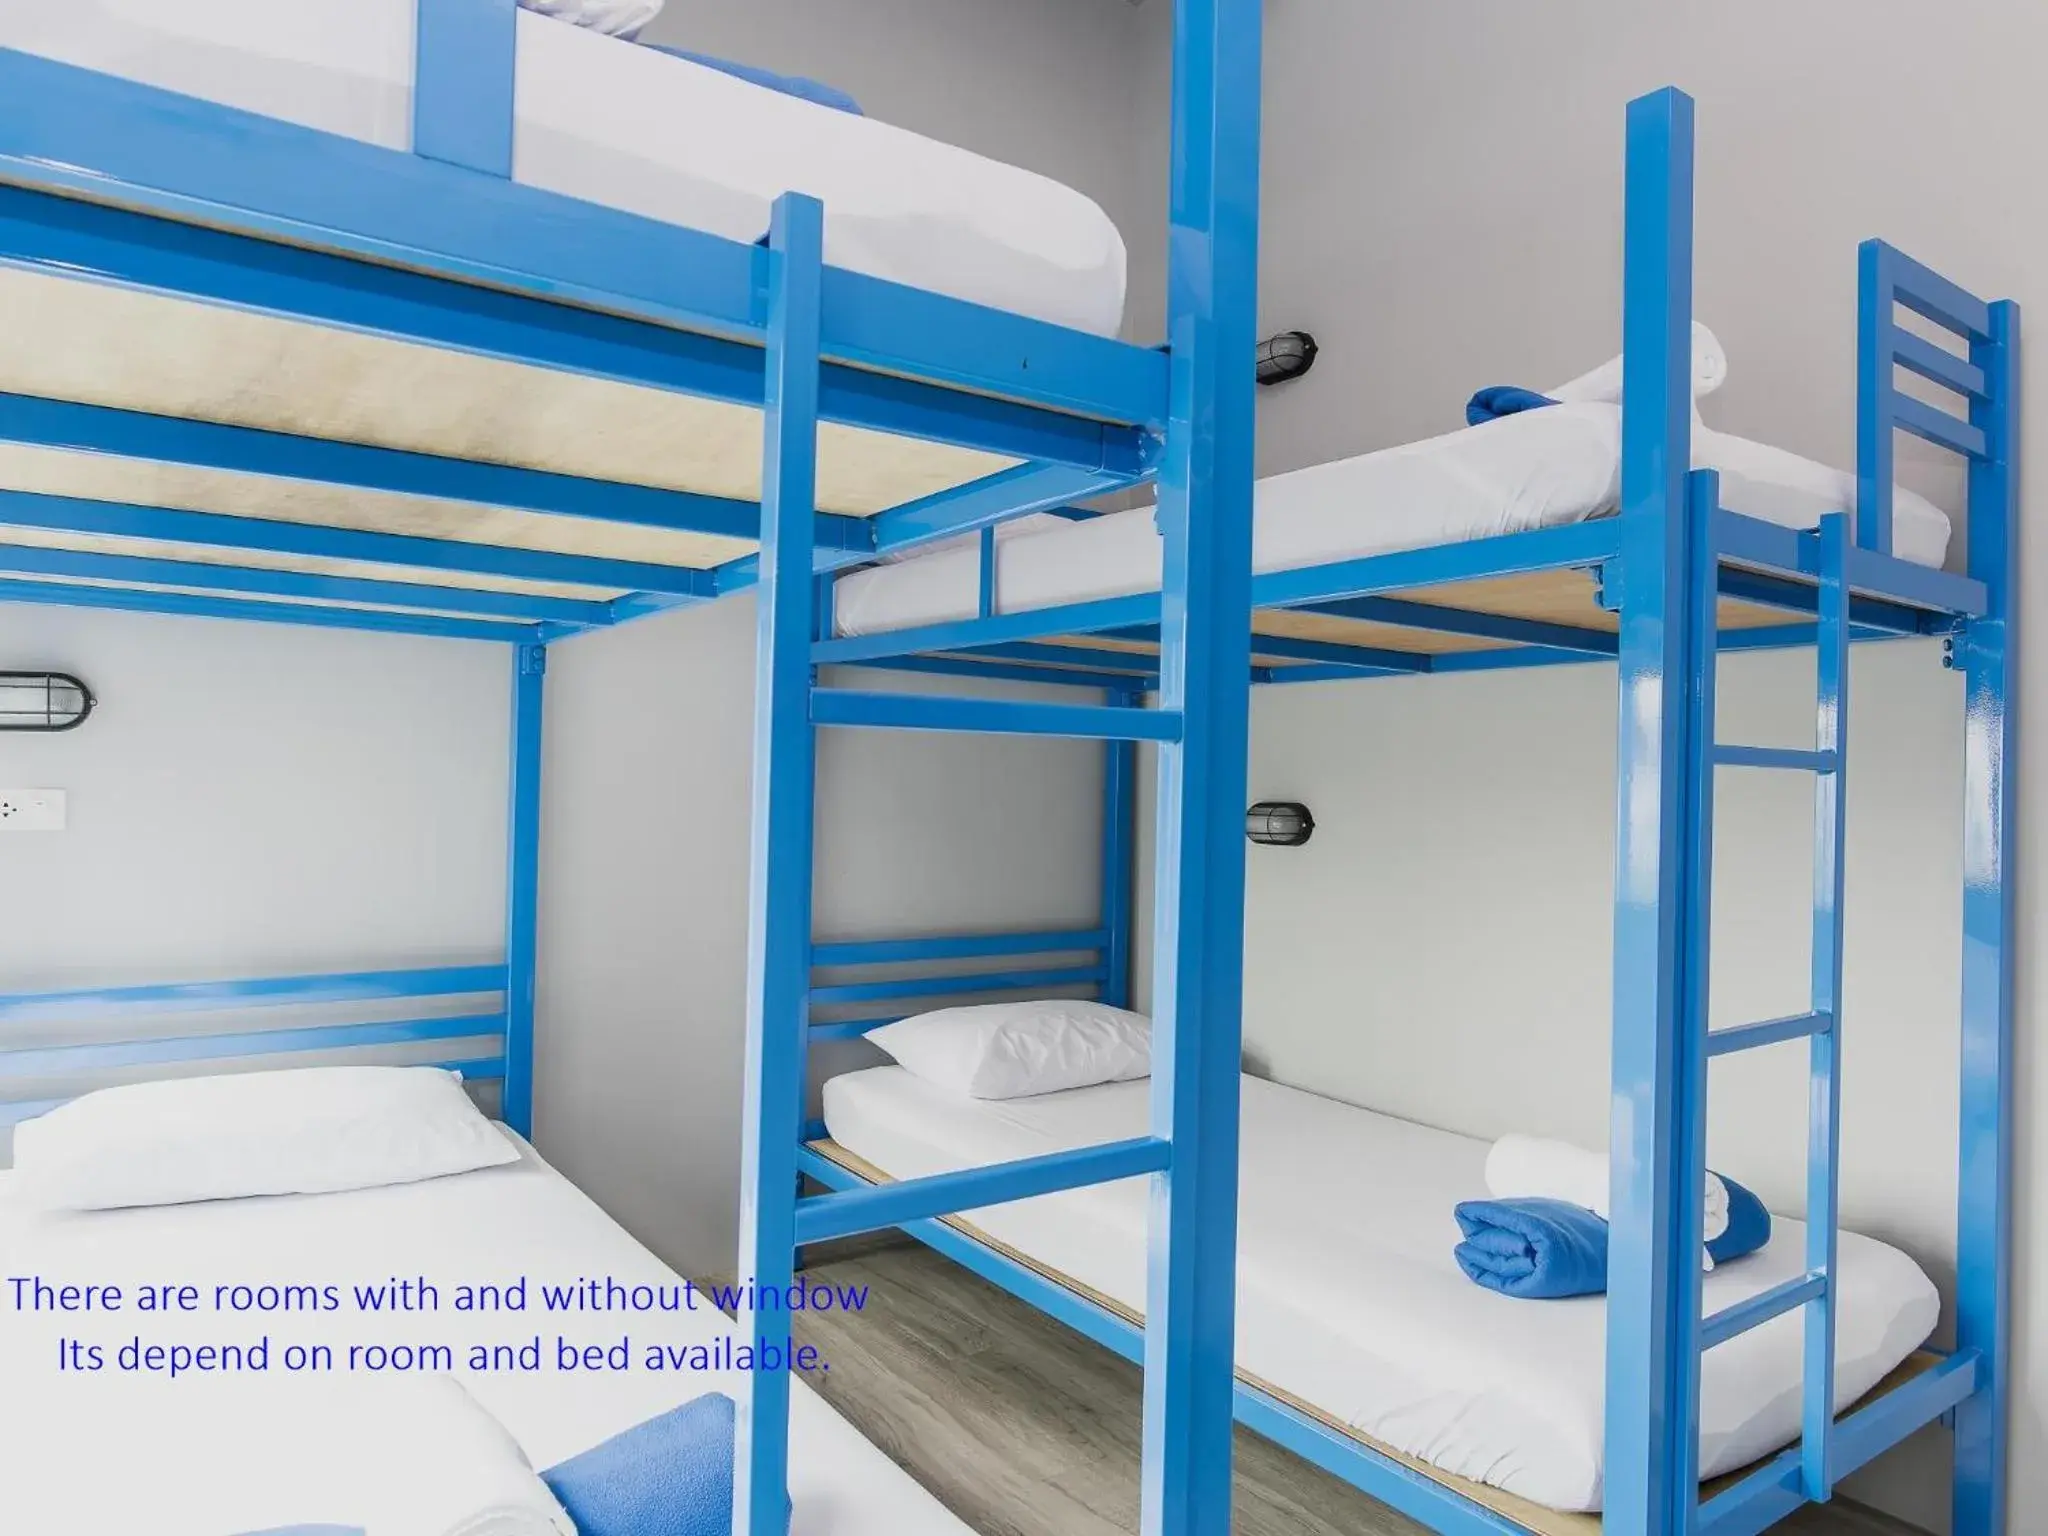 Family Room with Shared Bathroom in Loftel Station Hostel